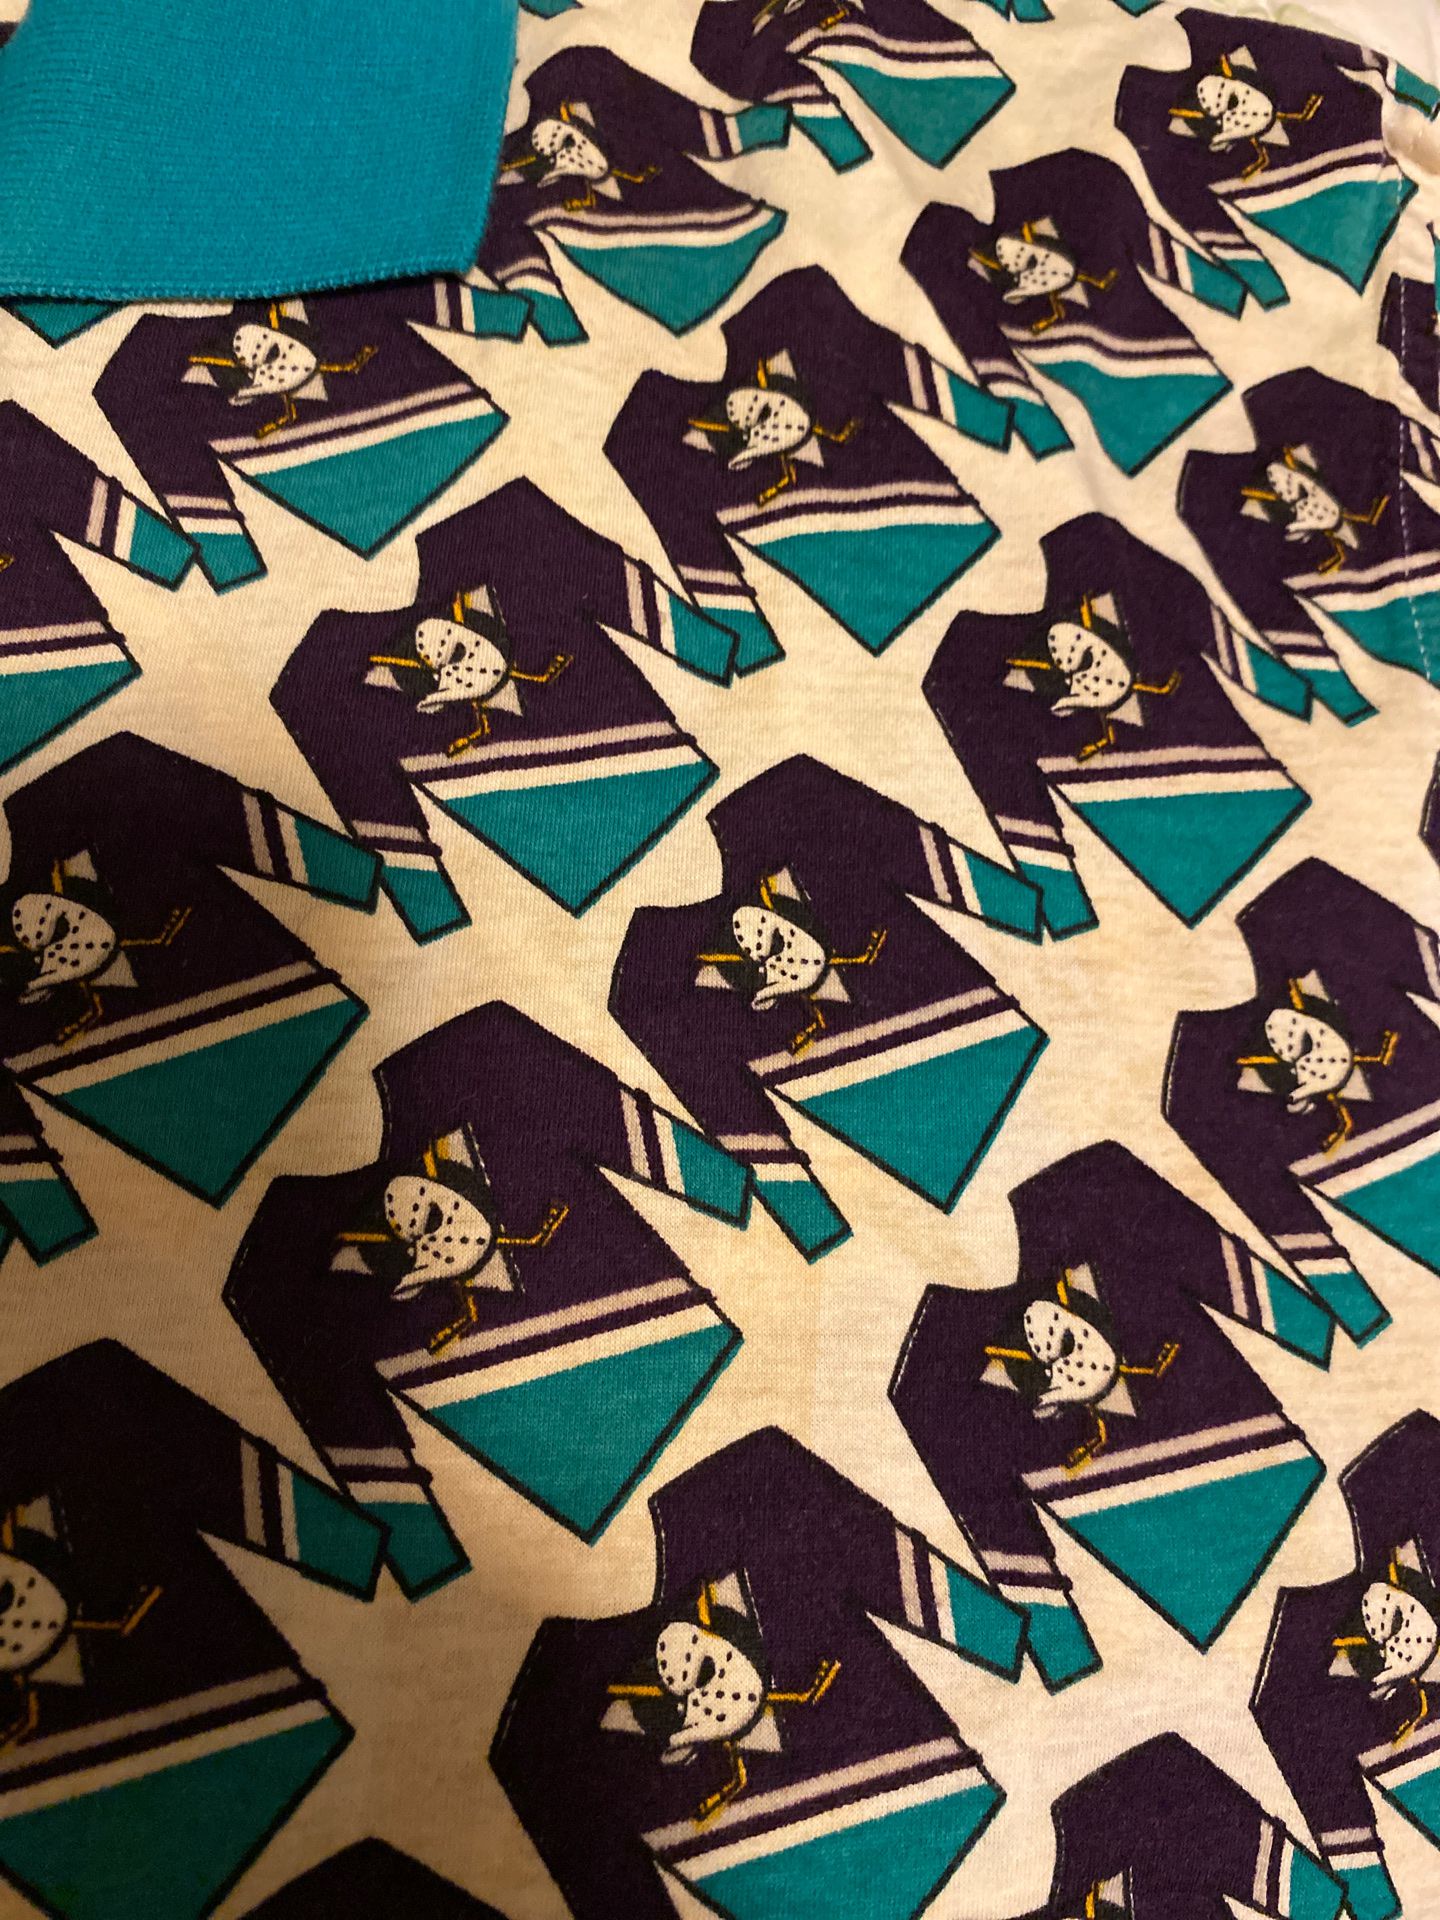 Vintage MIGHTY DUCKS of Anaheim Polo Shirt by Pro Celebrity 